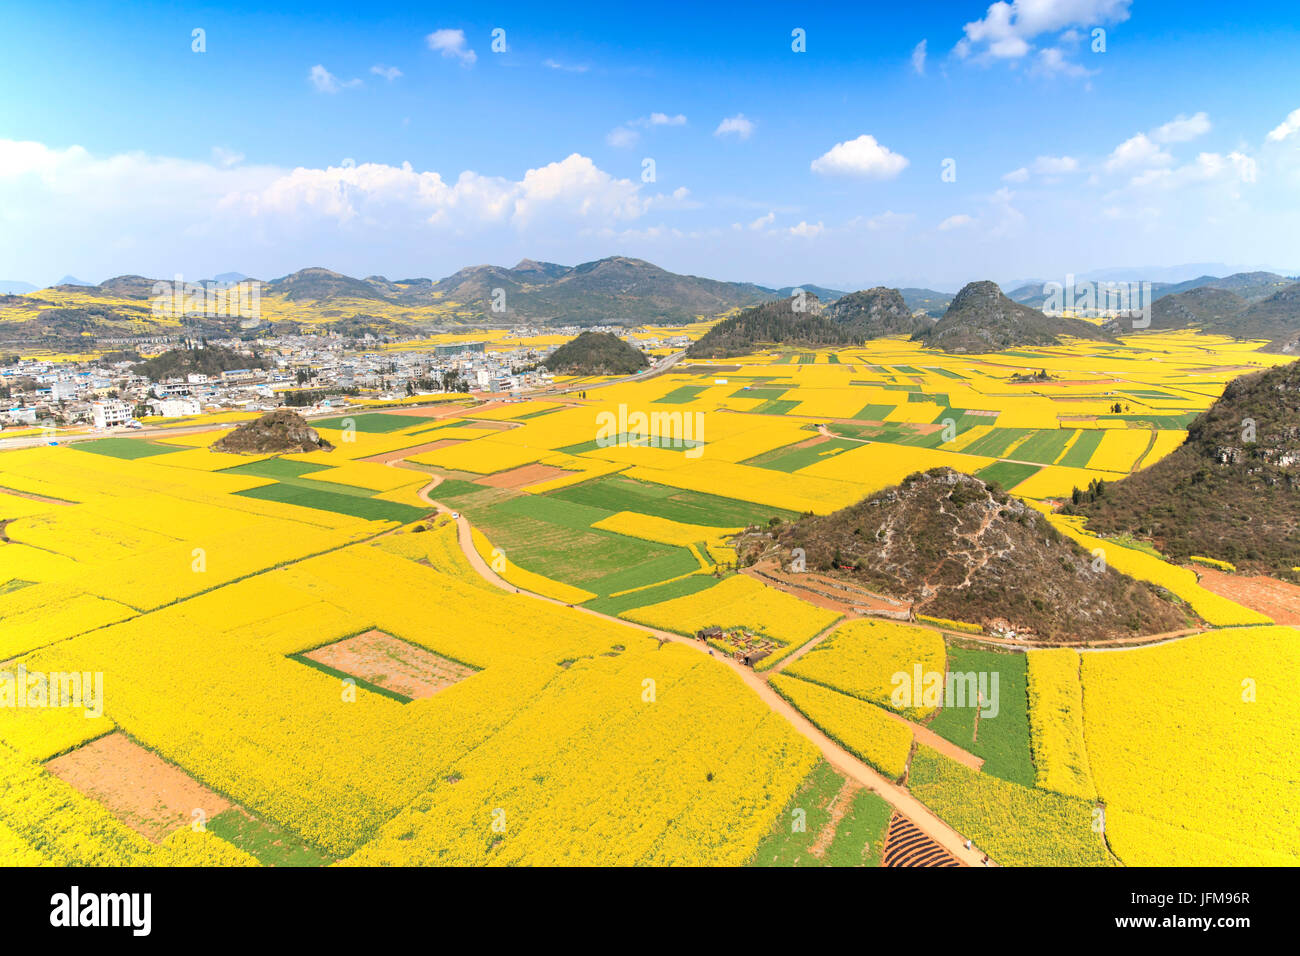 Rapeseed flowers of Luoping in Yunnan China Stock Photo